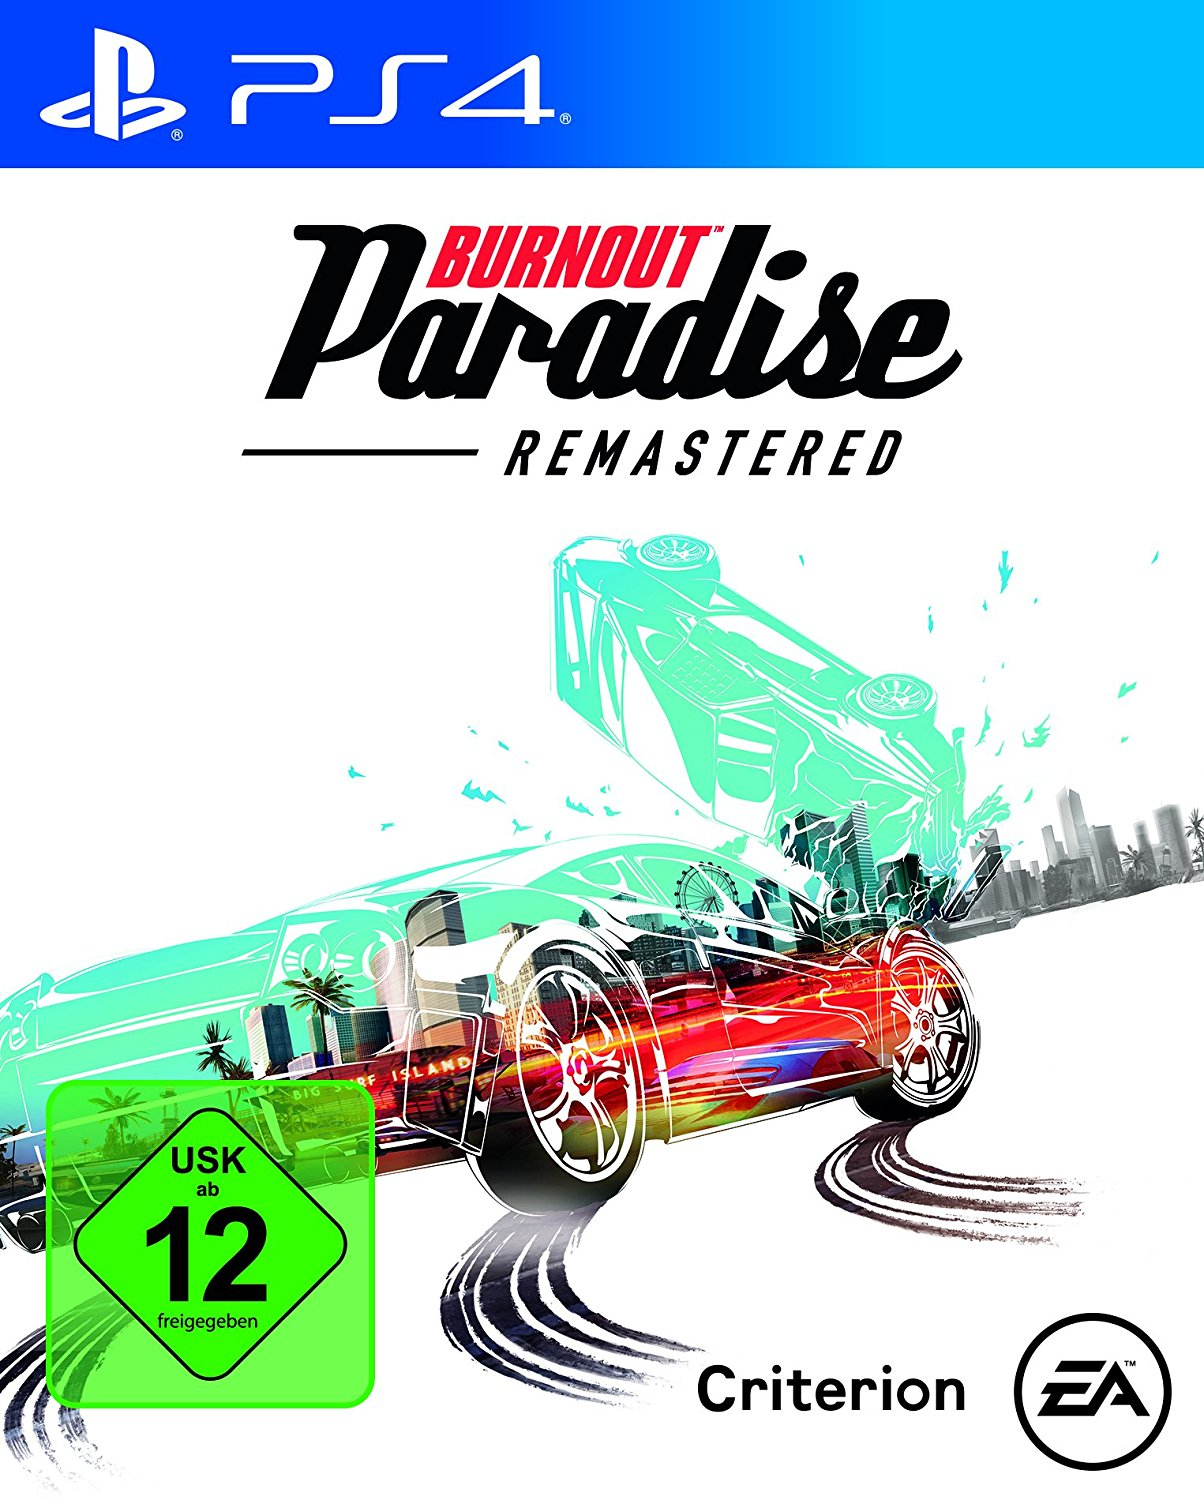 Burnout Paradise PS-4 Remastered - 4] [PlayStation